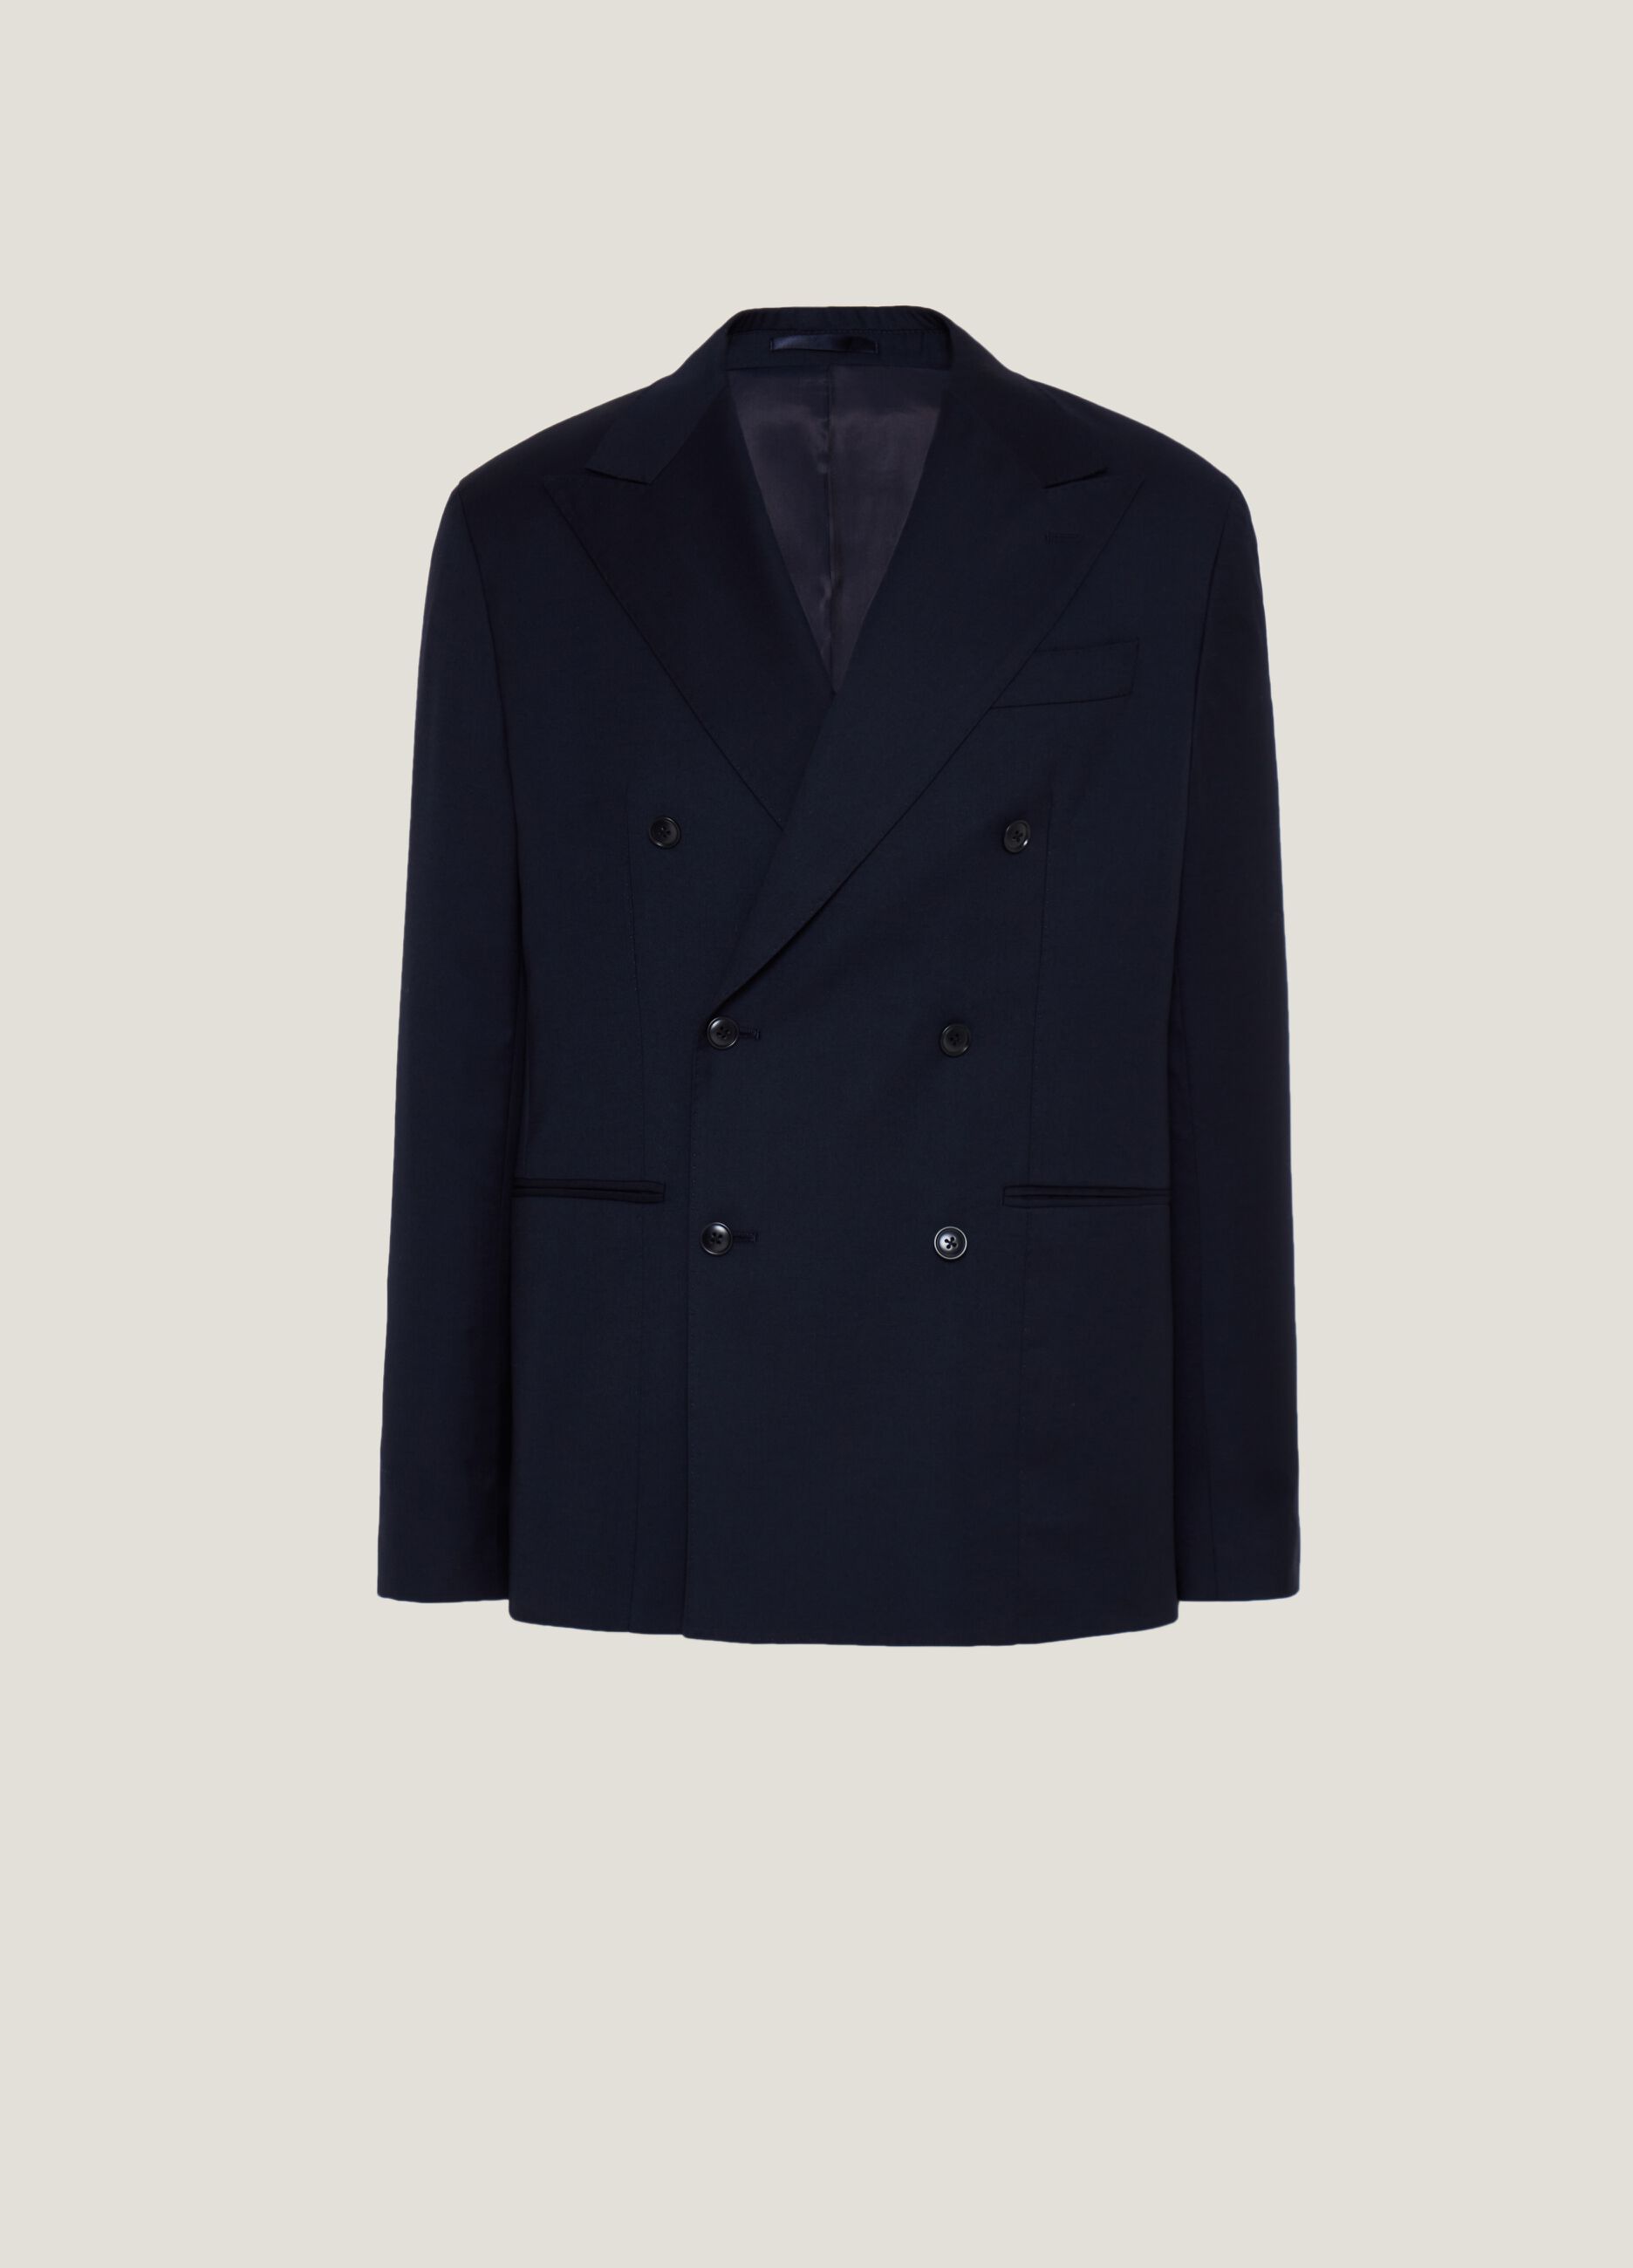 PIOMBO Man's Navy Blue Double-breasted formal blazer in navy blue | OVS